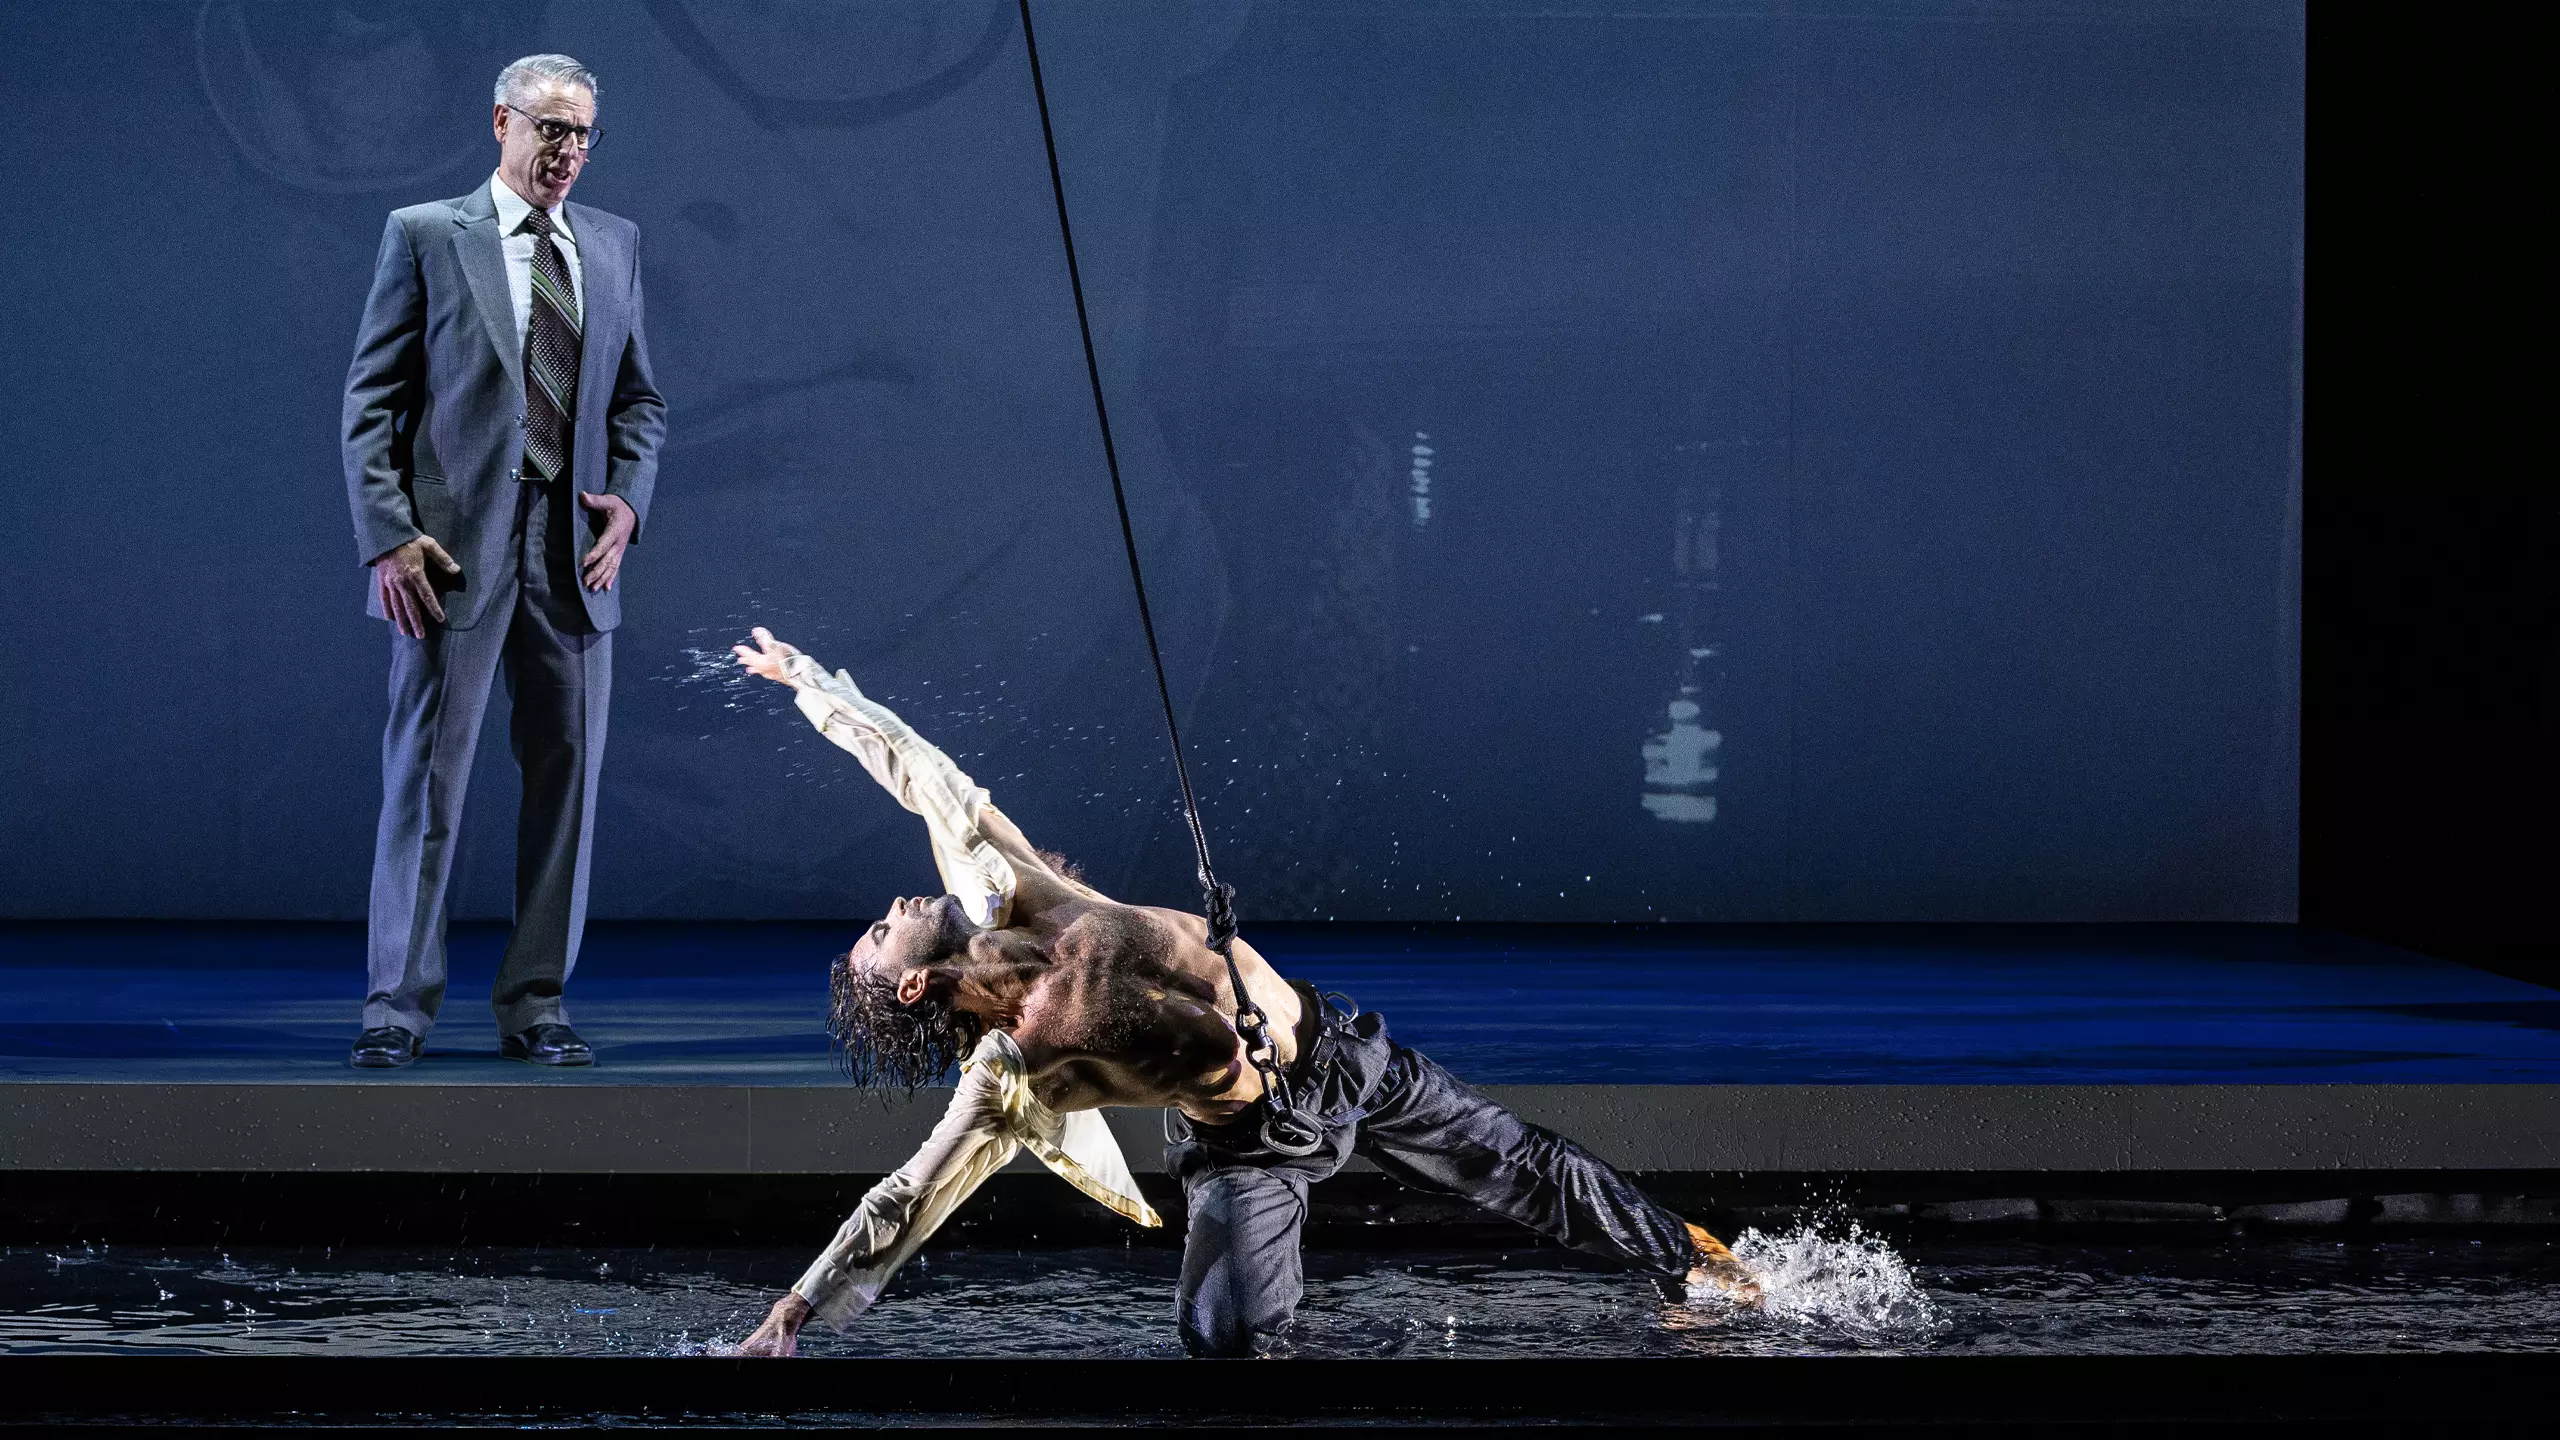 A white man with grey hair in a suit stands looking at a male dancer knelt on the floor. The dancer wears a harness and is dancing in water.